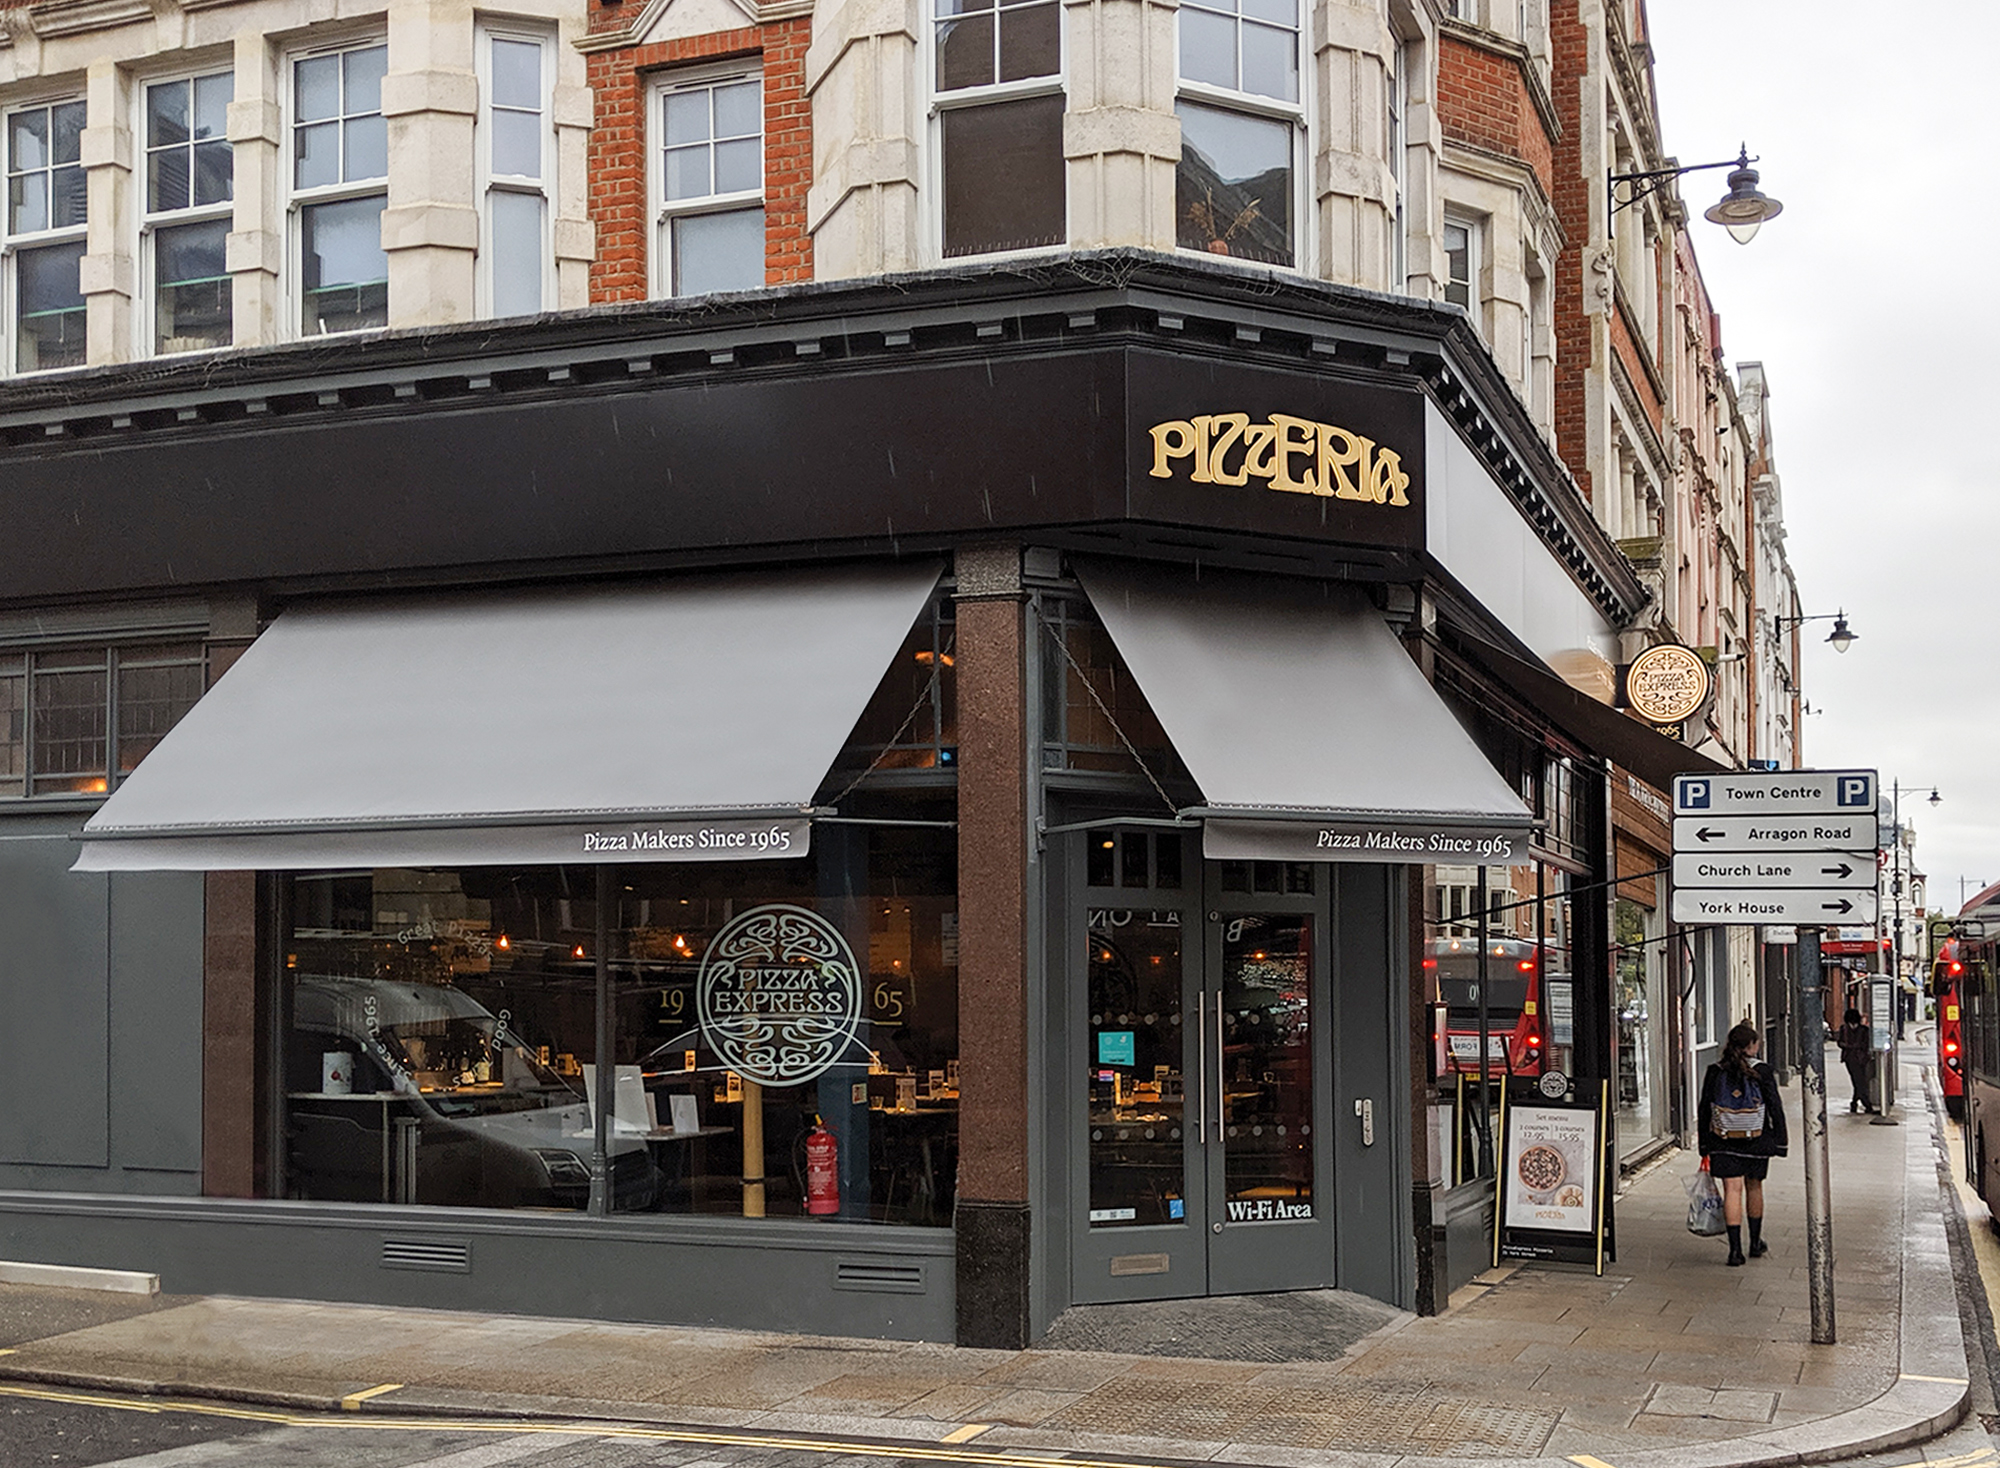 Pizza Express awnings